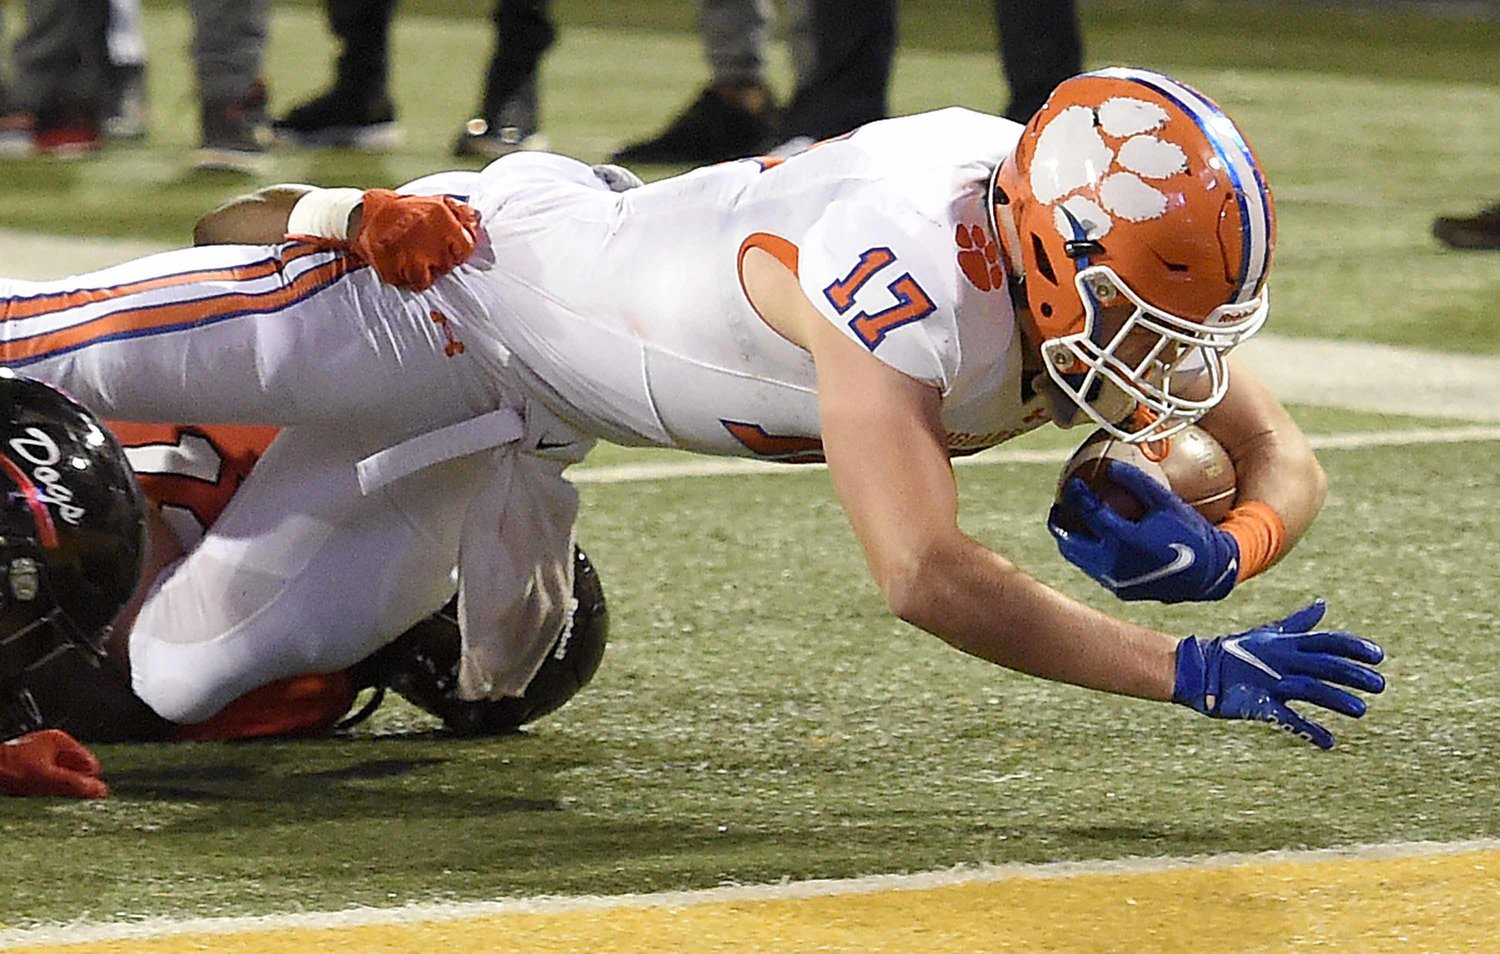 Madison Central's Jake Norris (17) lunges for the end zone in the MHSAA Class 6A Football State Championship game